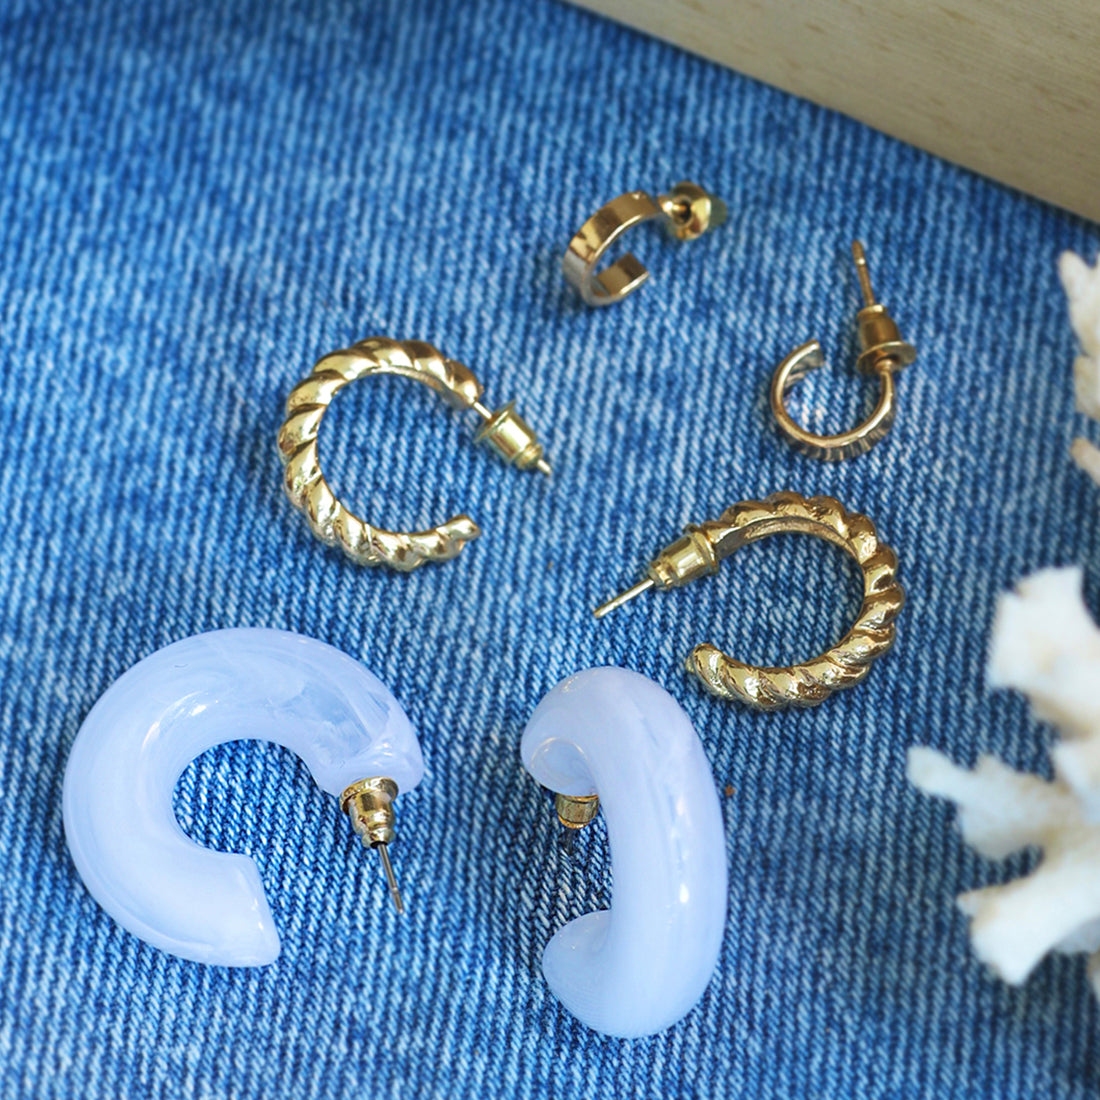 Set Of 3 Gold-Toned Mini, Twisted & Resin Open-Hoop Party Earrings